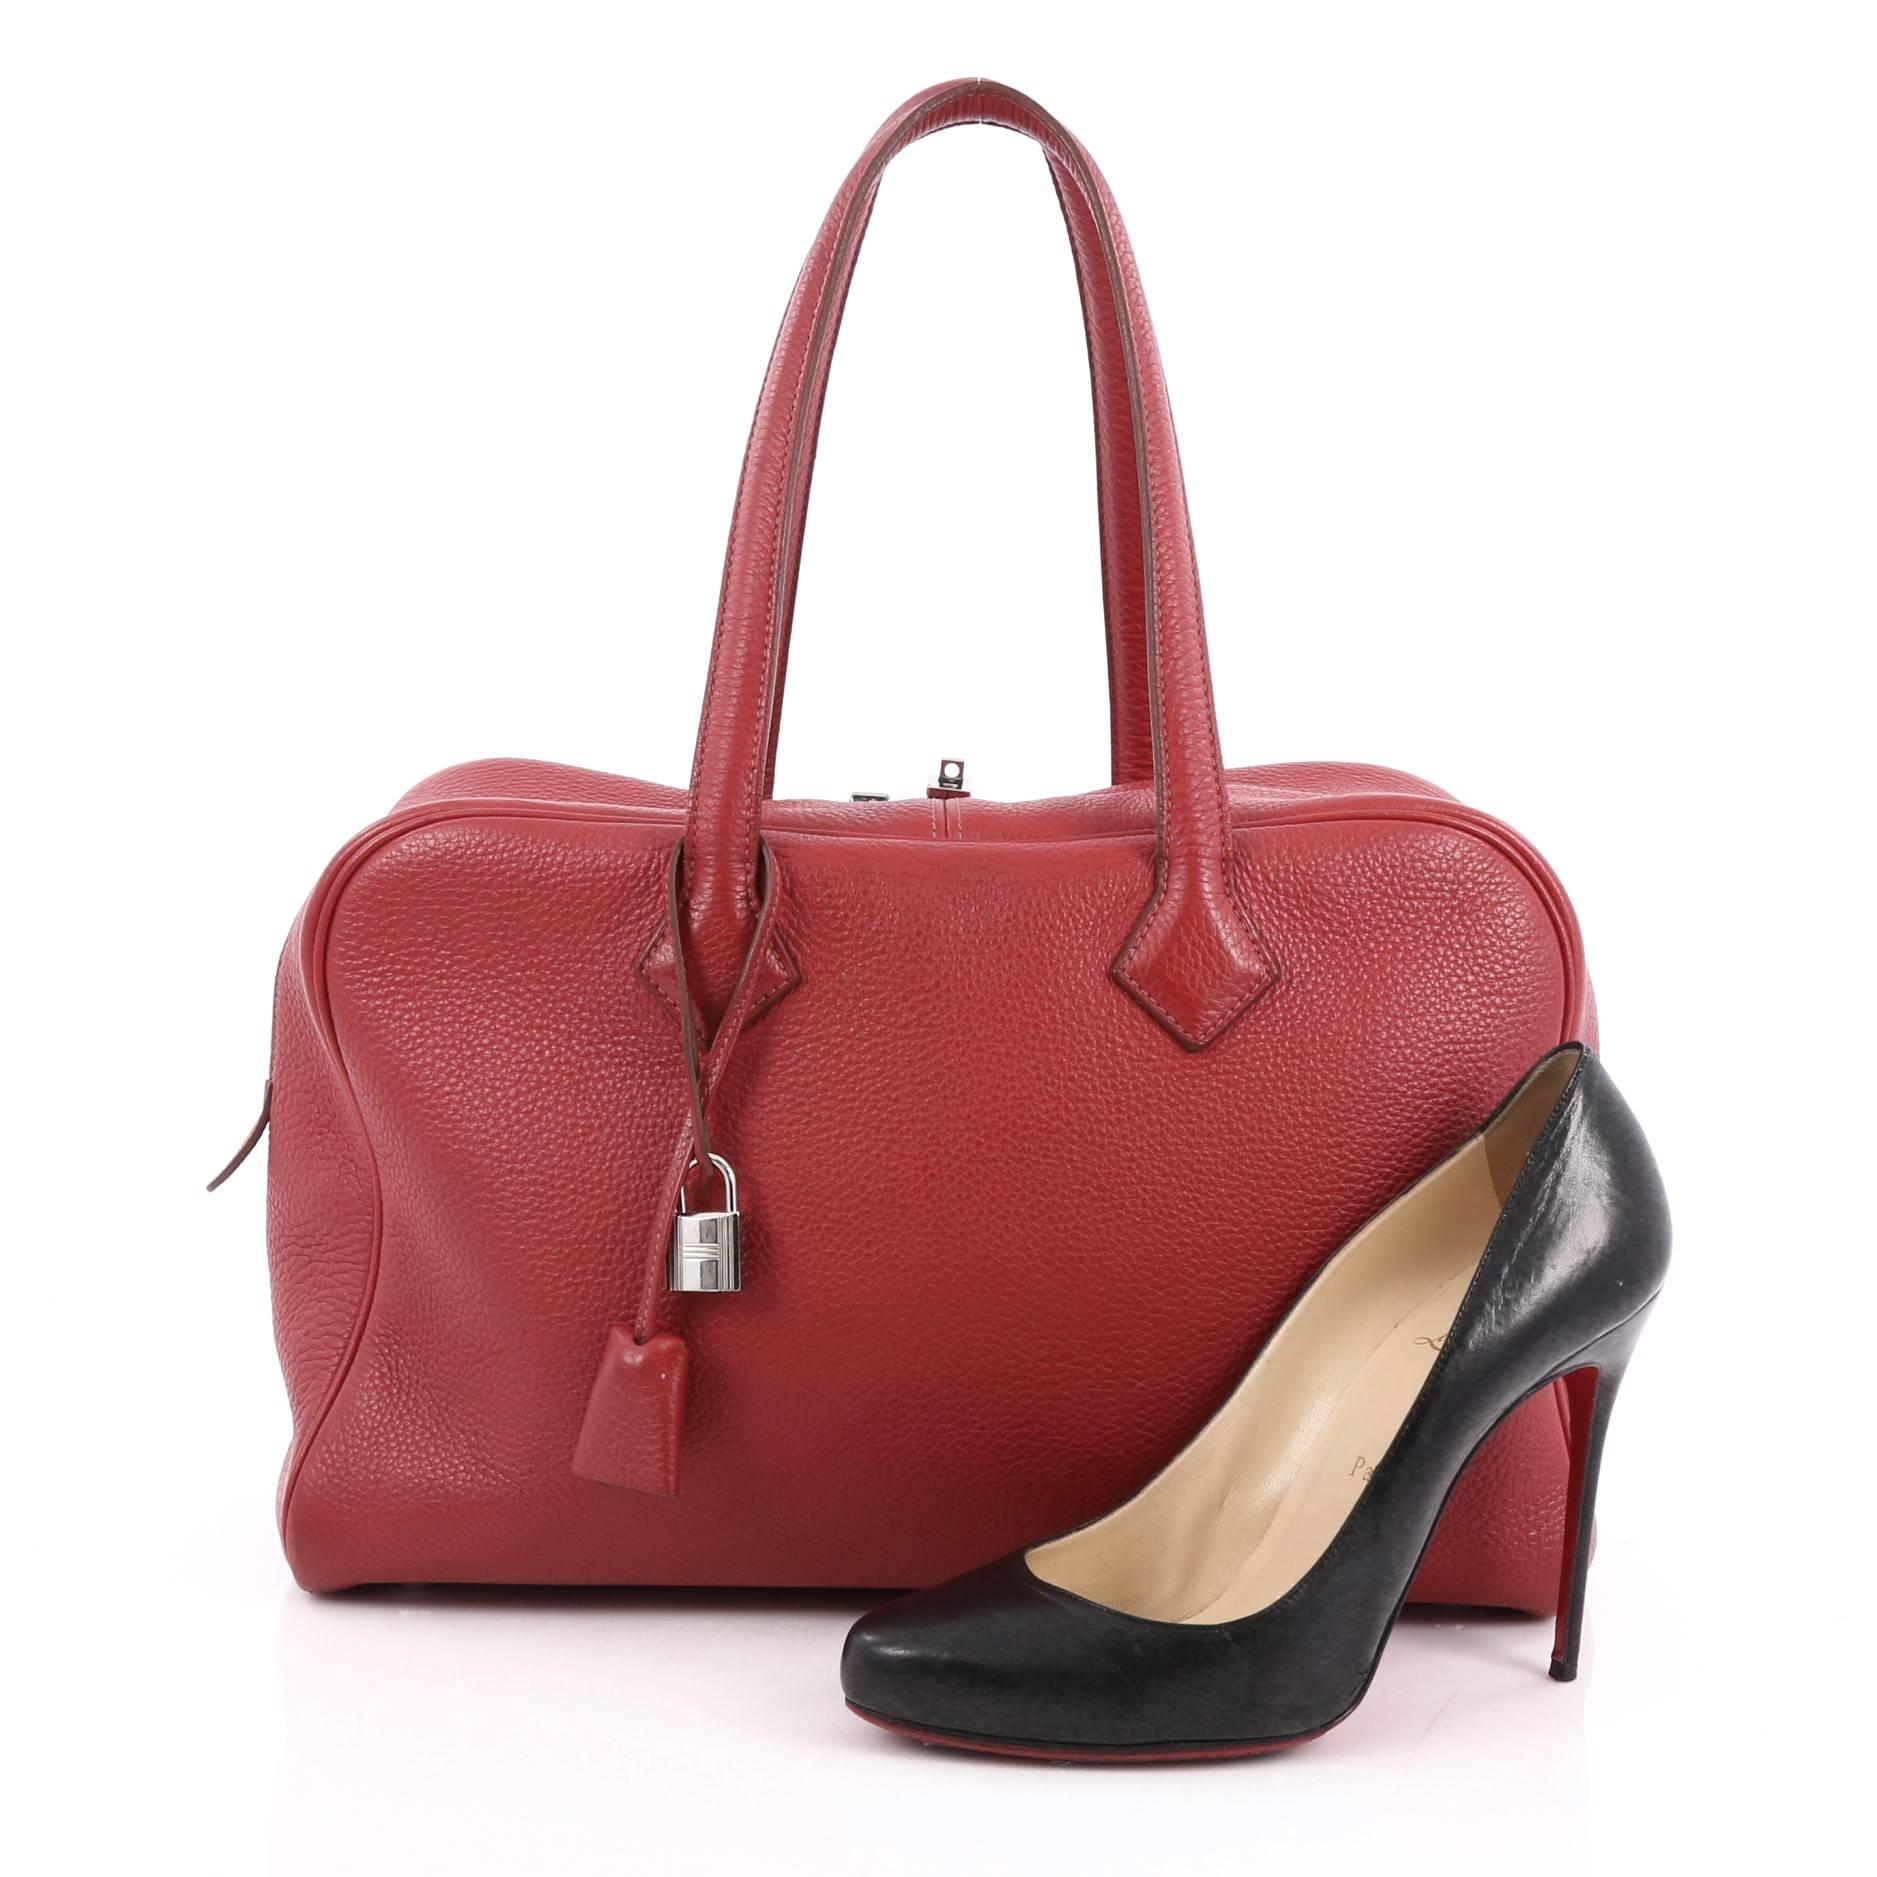 This authentic Hermes Victoria II Handbag Clemence 35 is the perfect understated accessory for all seasons. Created in beautiful rubis red leather, this all-around understated functional tote features tall dual leather handles, protective base